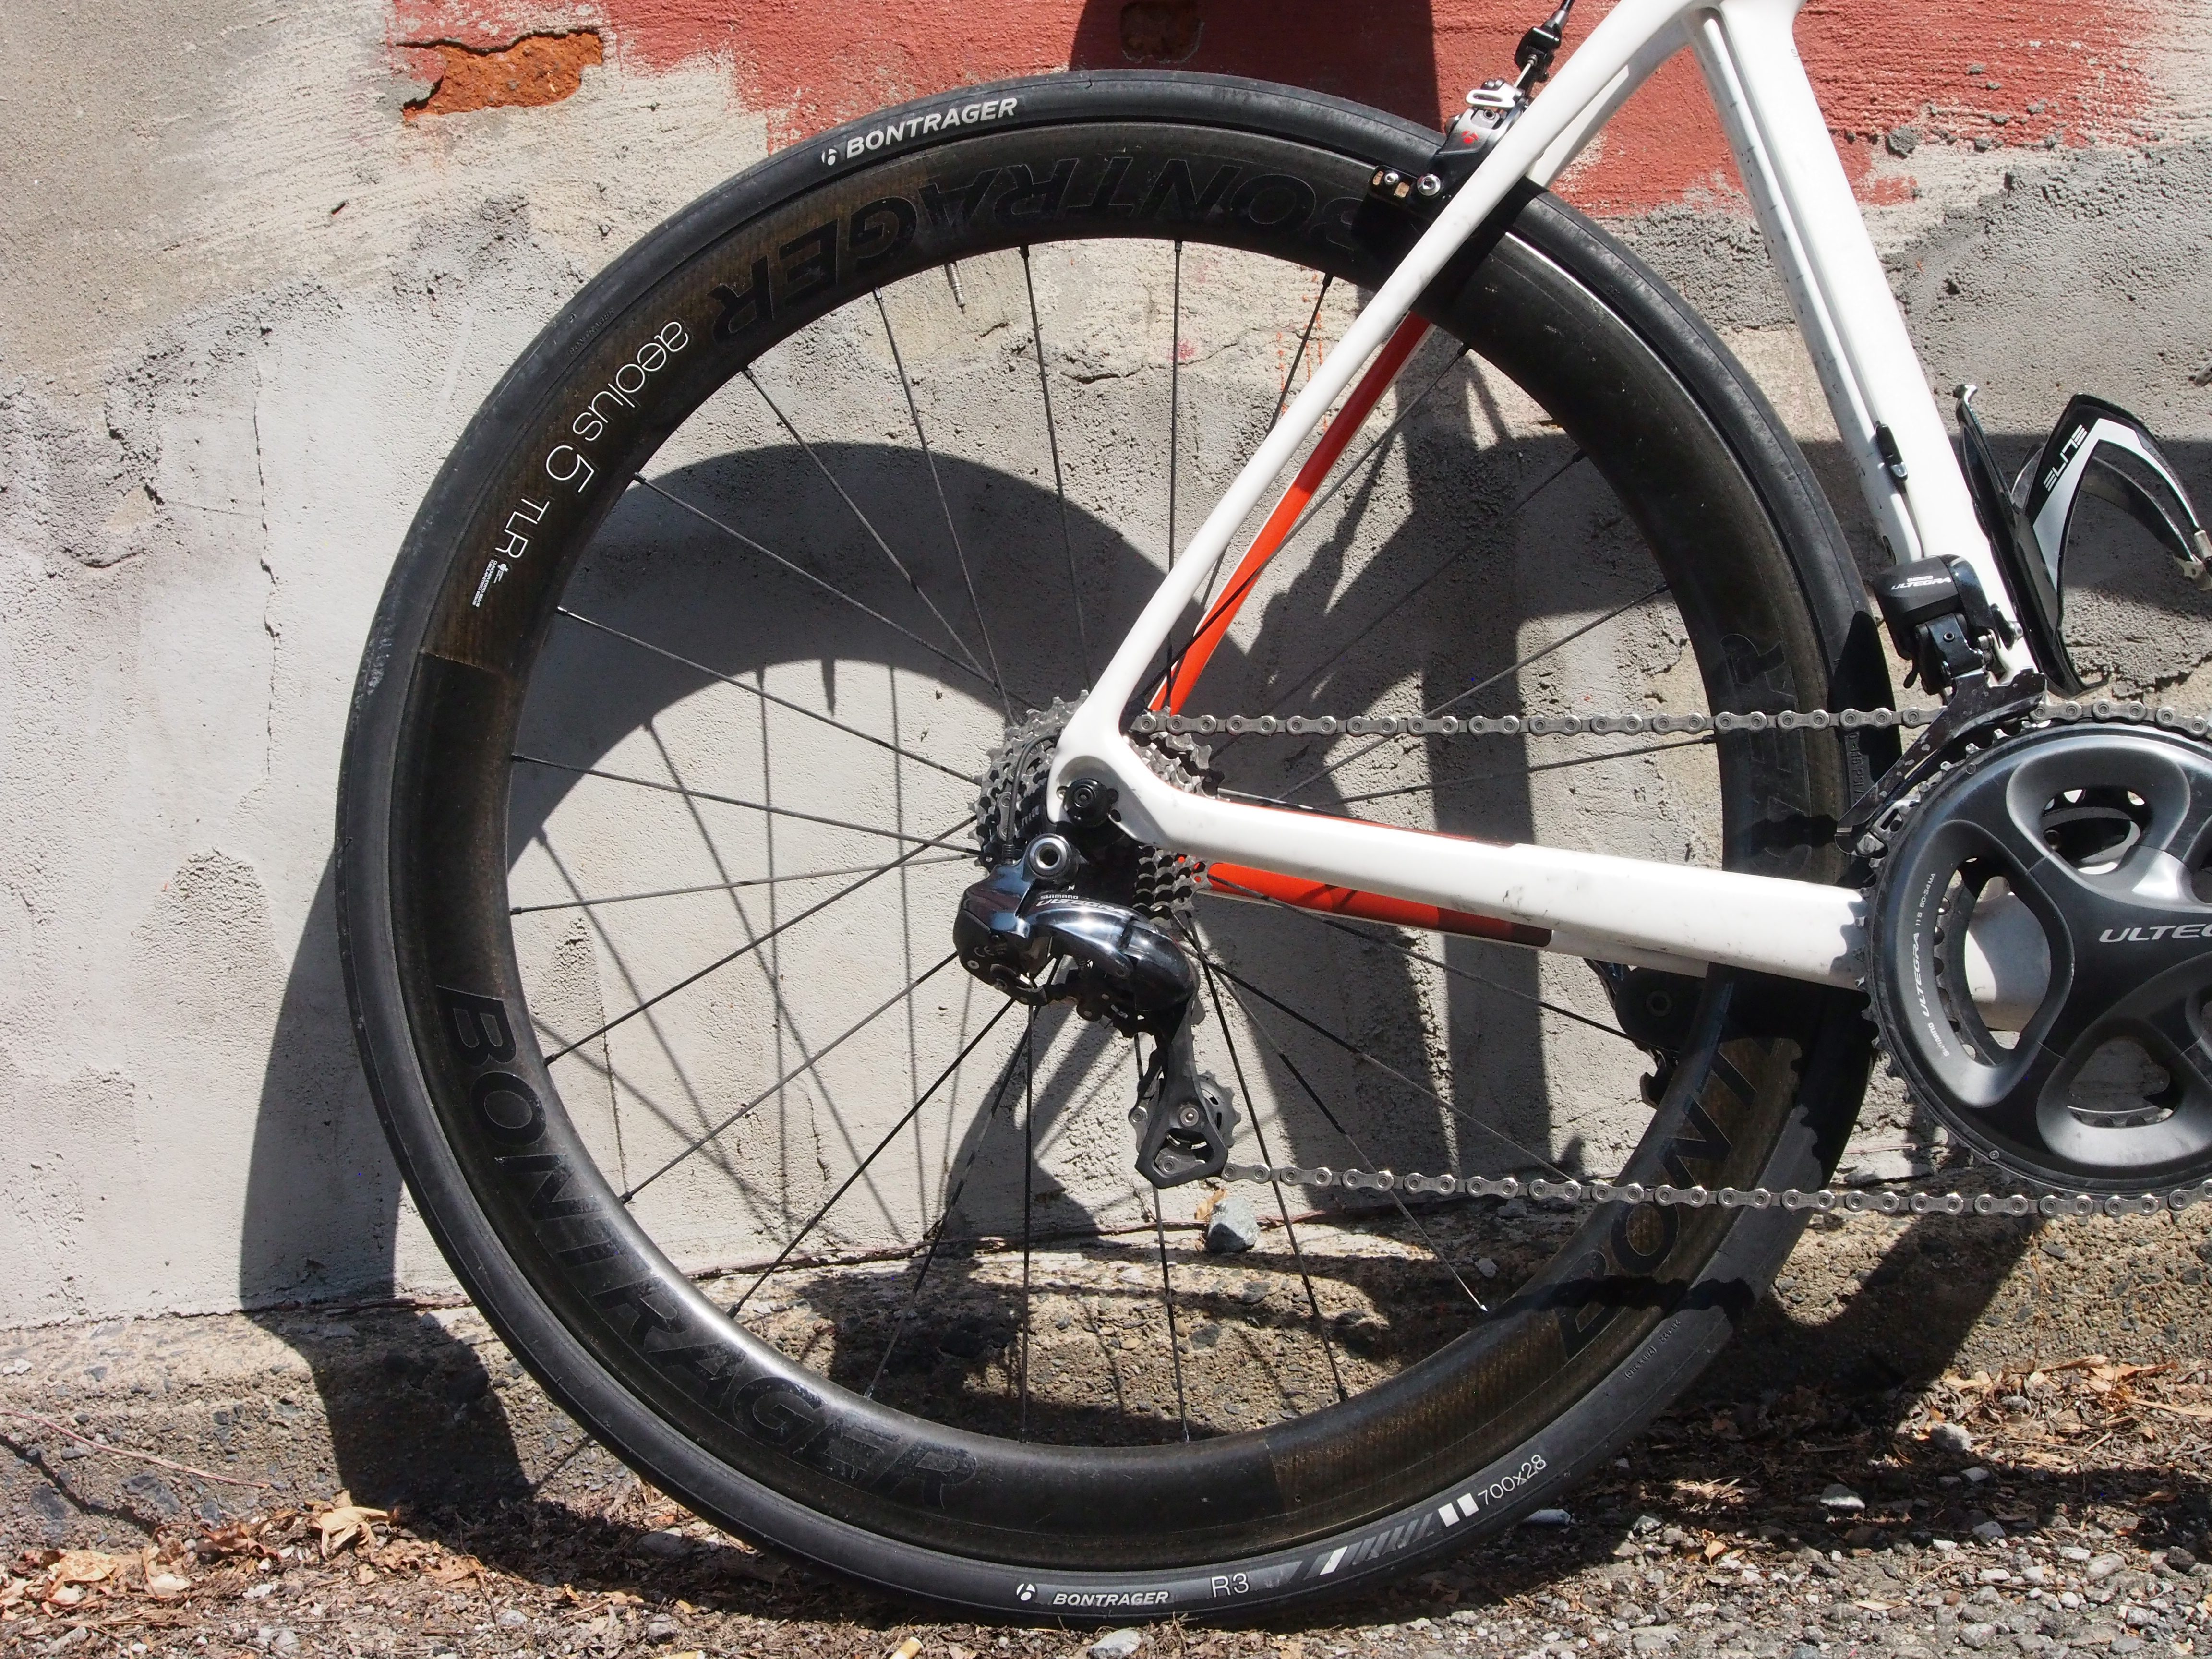 Bontrager Aeolus 5 TLR D3 wheel set review - Canadian Cycling Magazine